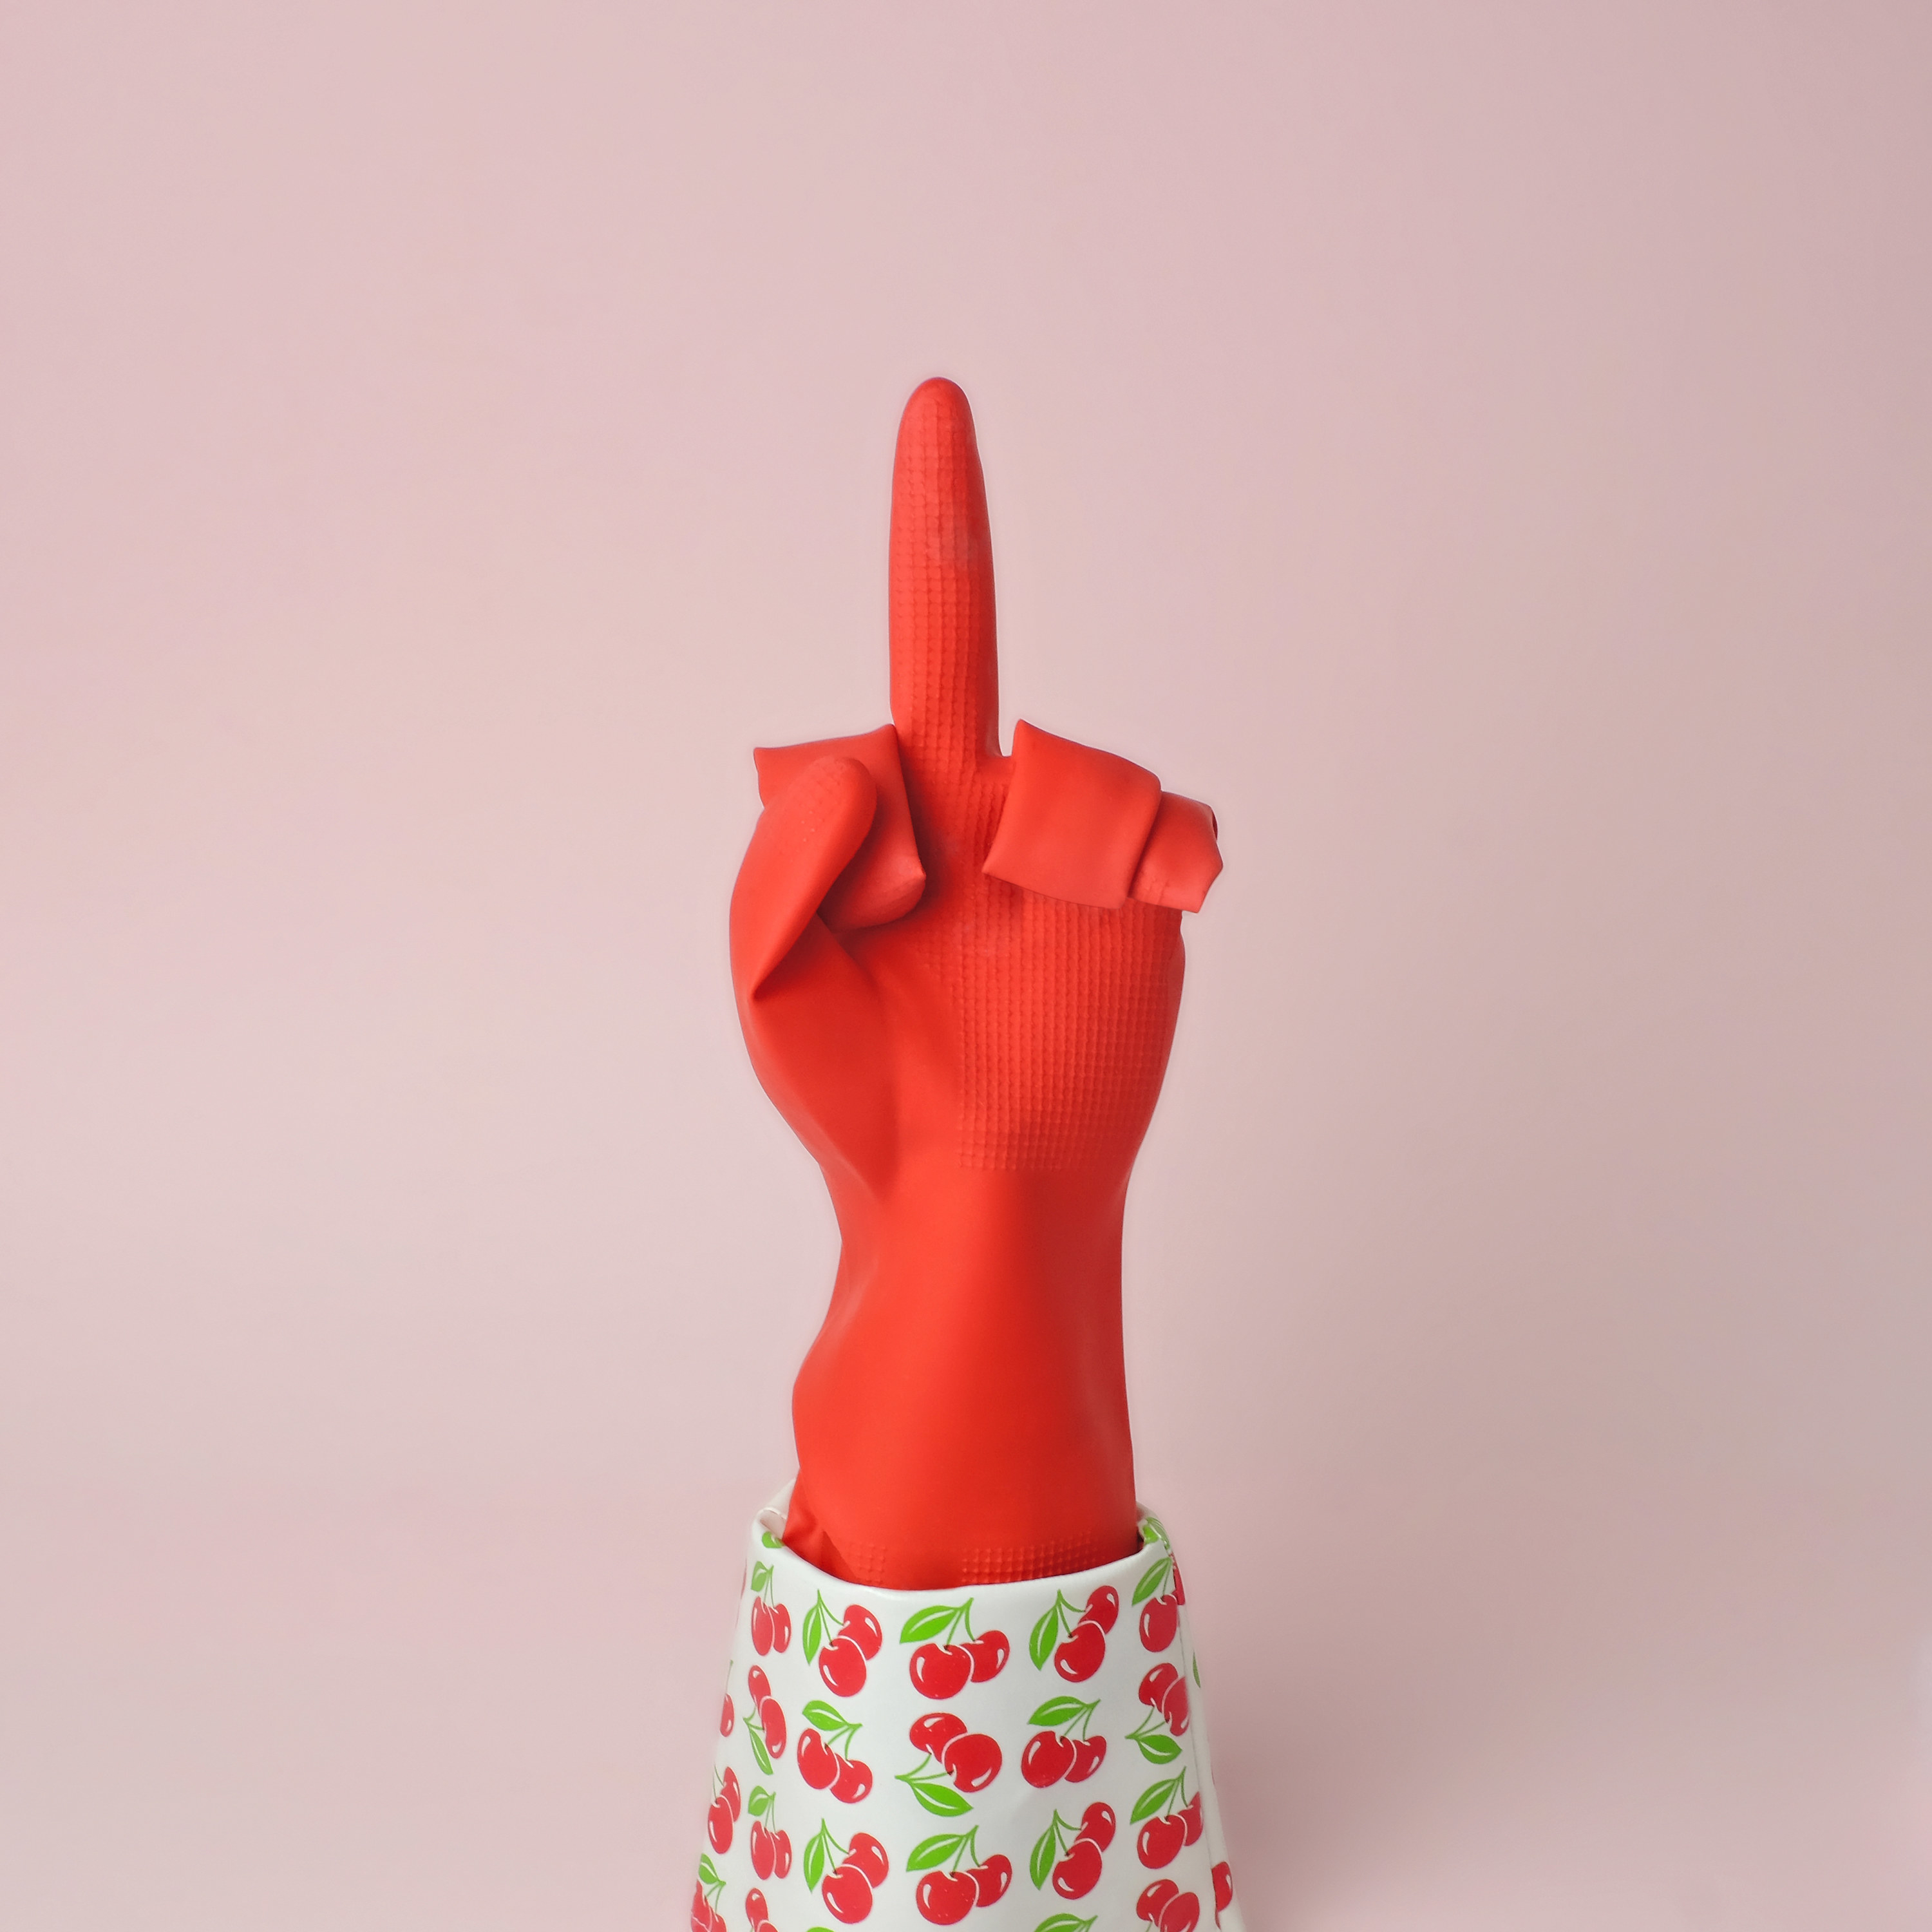 Rubber dishwashing glove with cherries decorating the end, stood up on end with fingers arranged with middle finger up